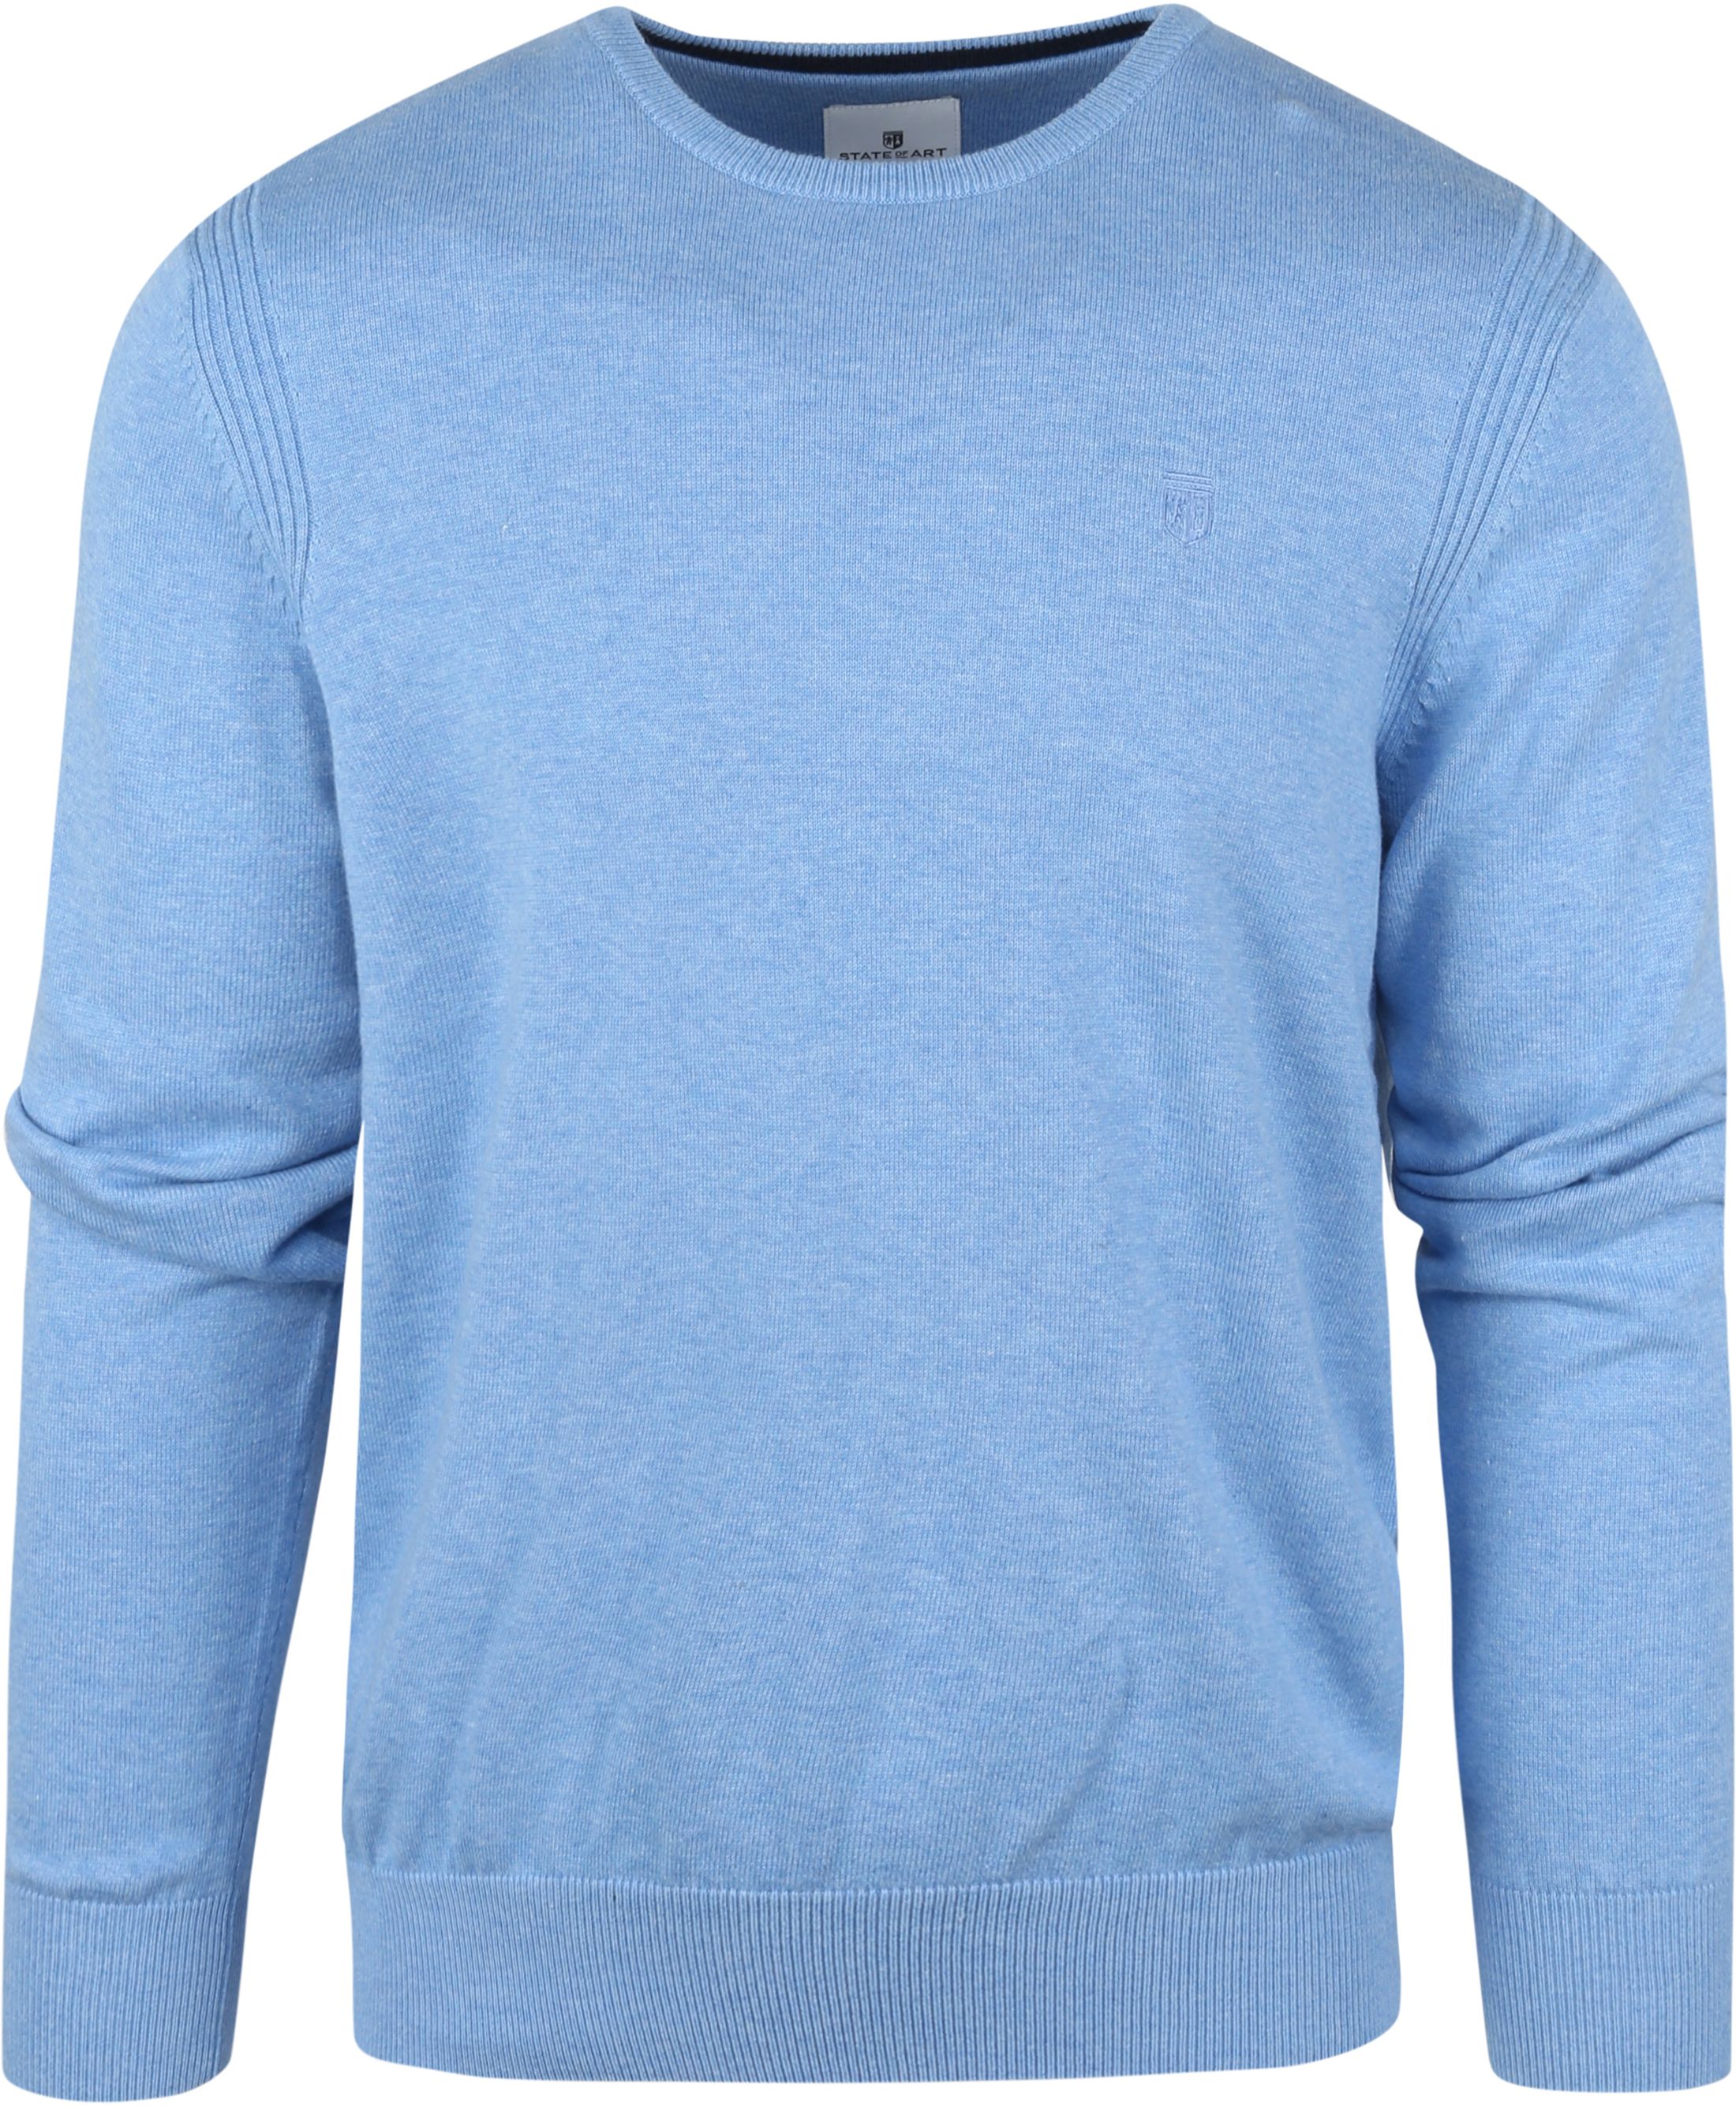 State Of Art Pullover Light Blue size L